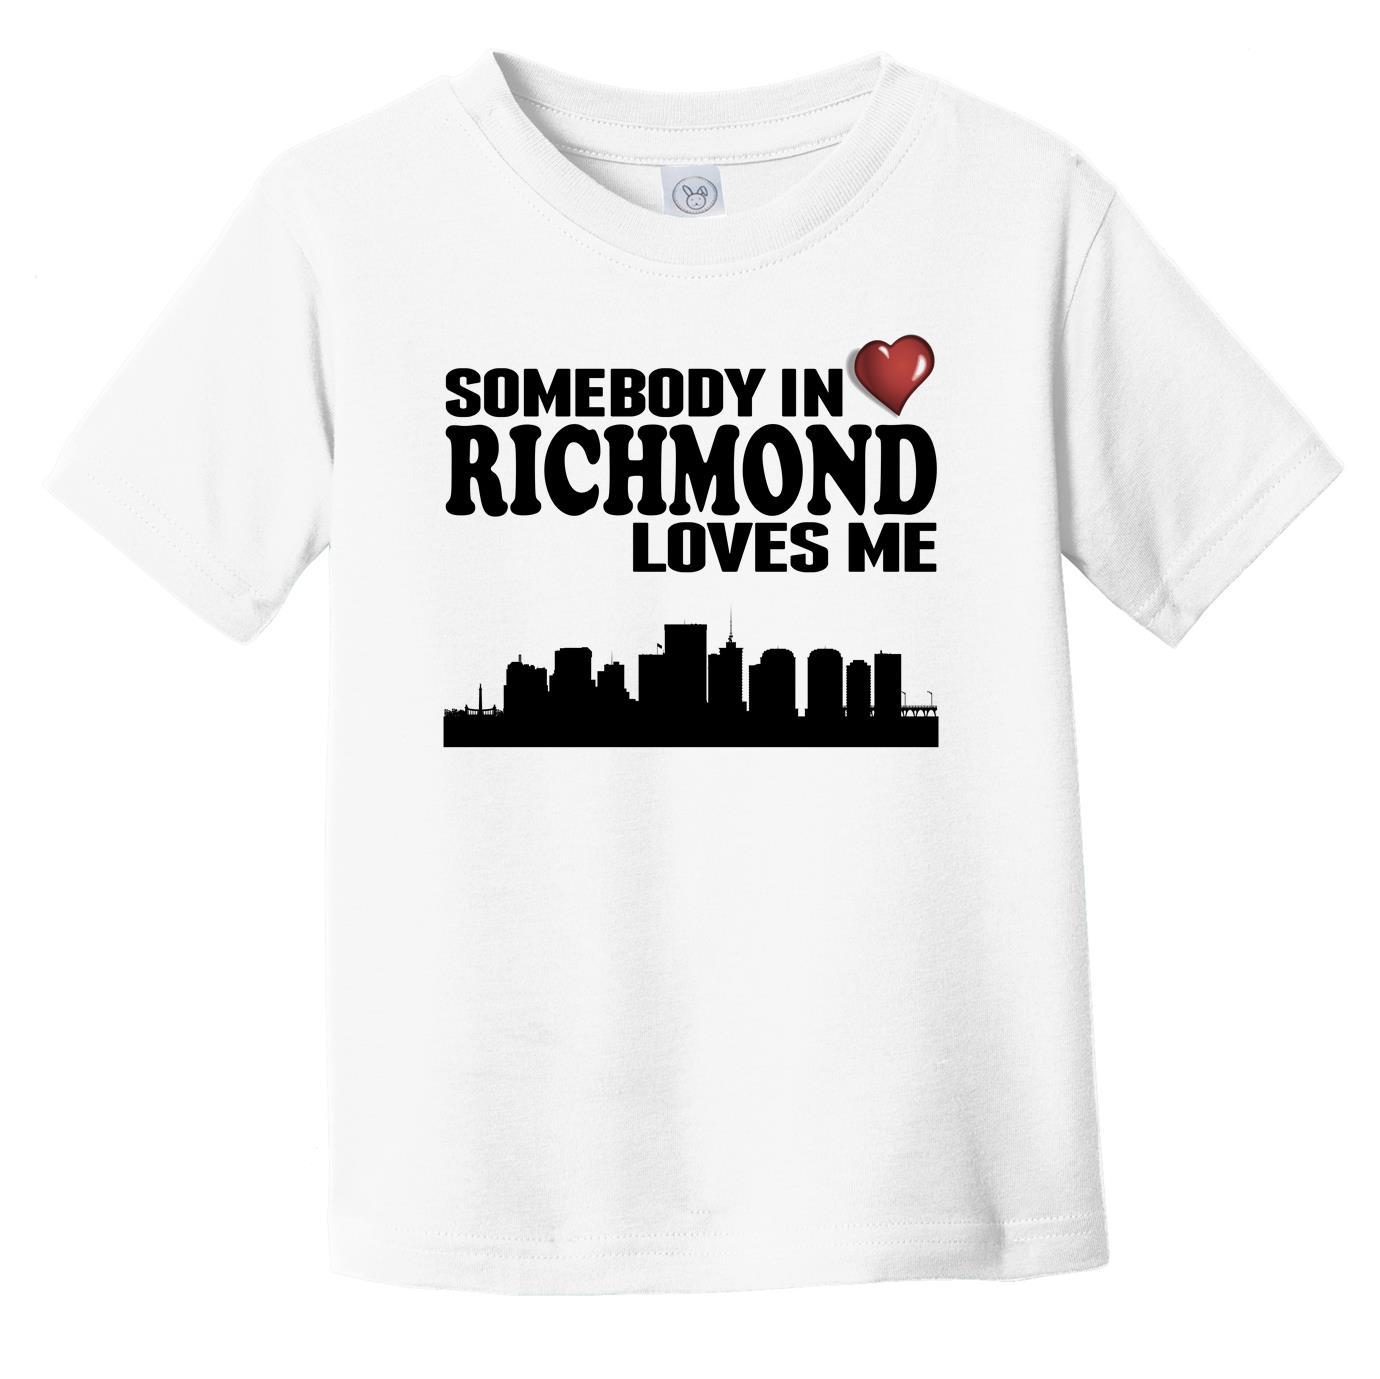 Somebody In Richmond Loves Me Infant Toddler T-Shirt